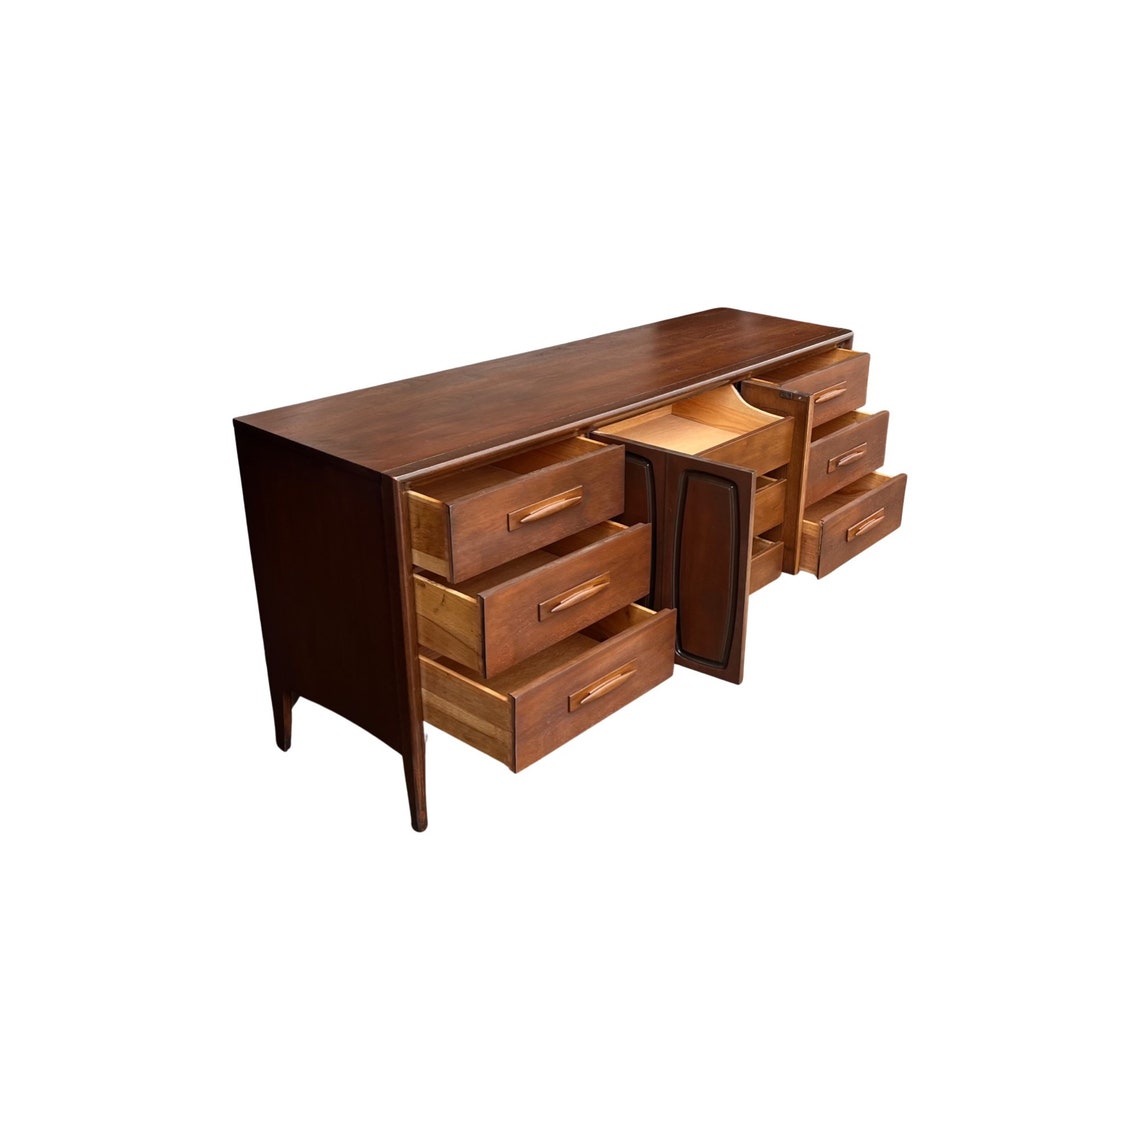 Nine Dovetailed Drawers and Signature Routed Curves - Broyhill Emphasis Lowboy